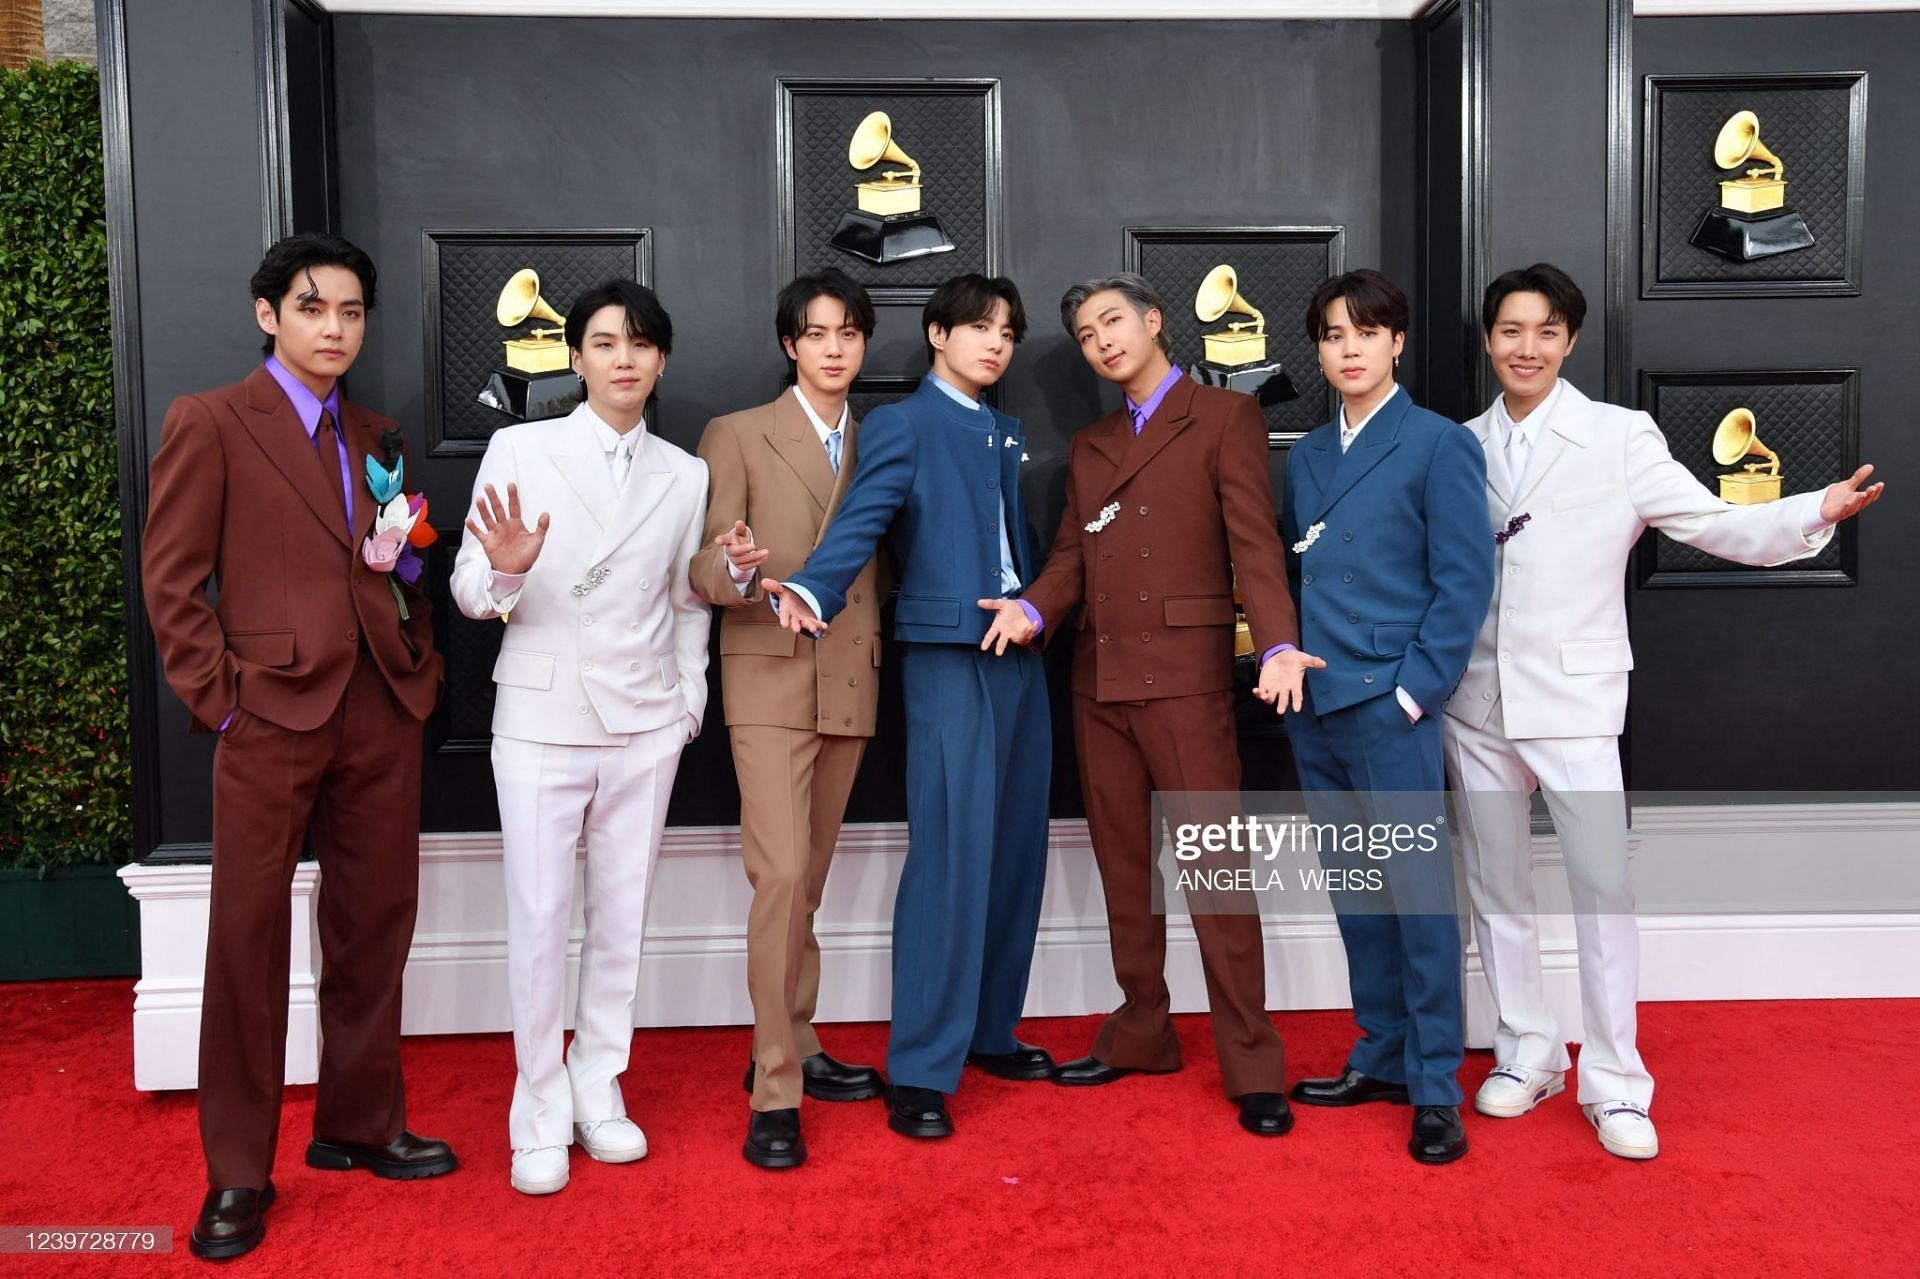 BTS at the Grammys 2022 (Image via Getty)